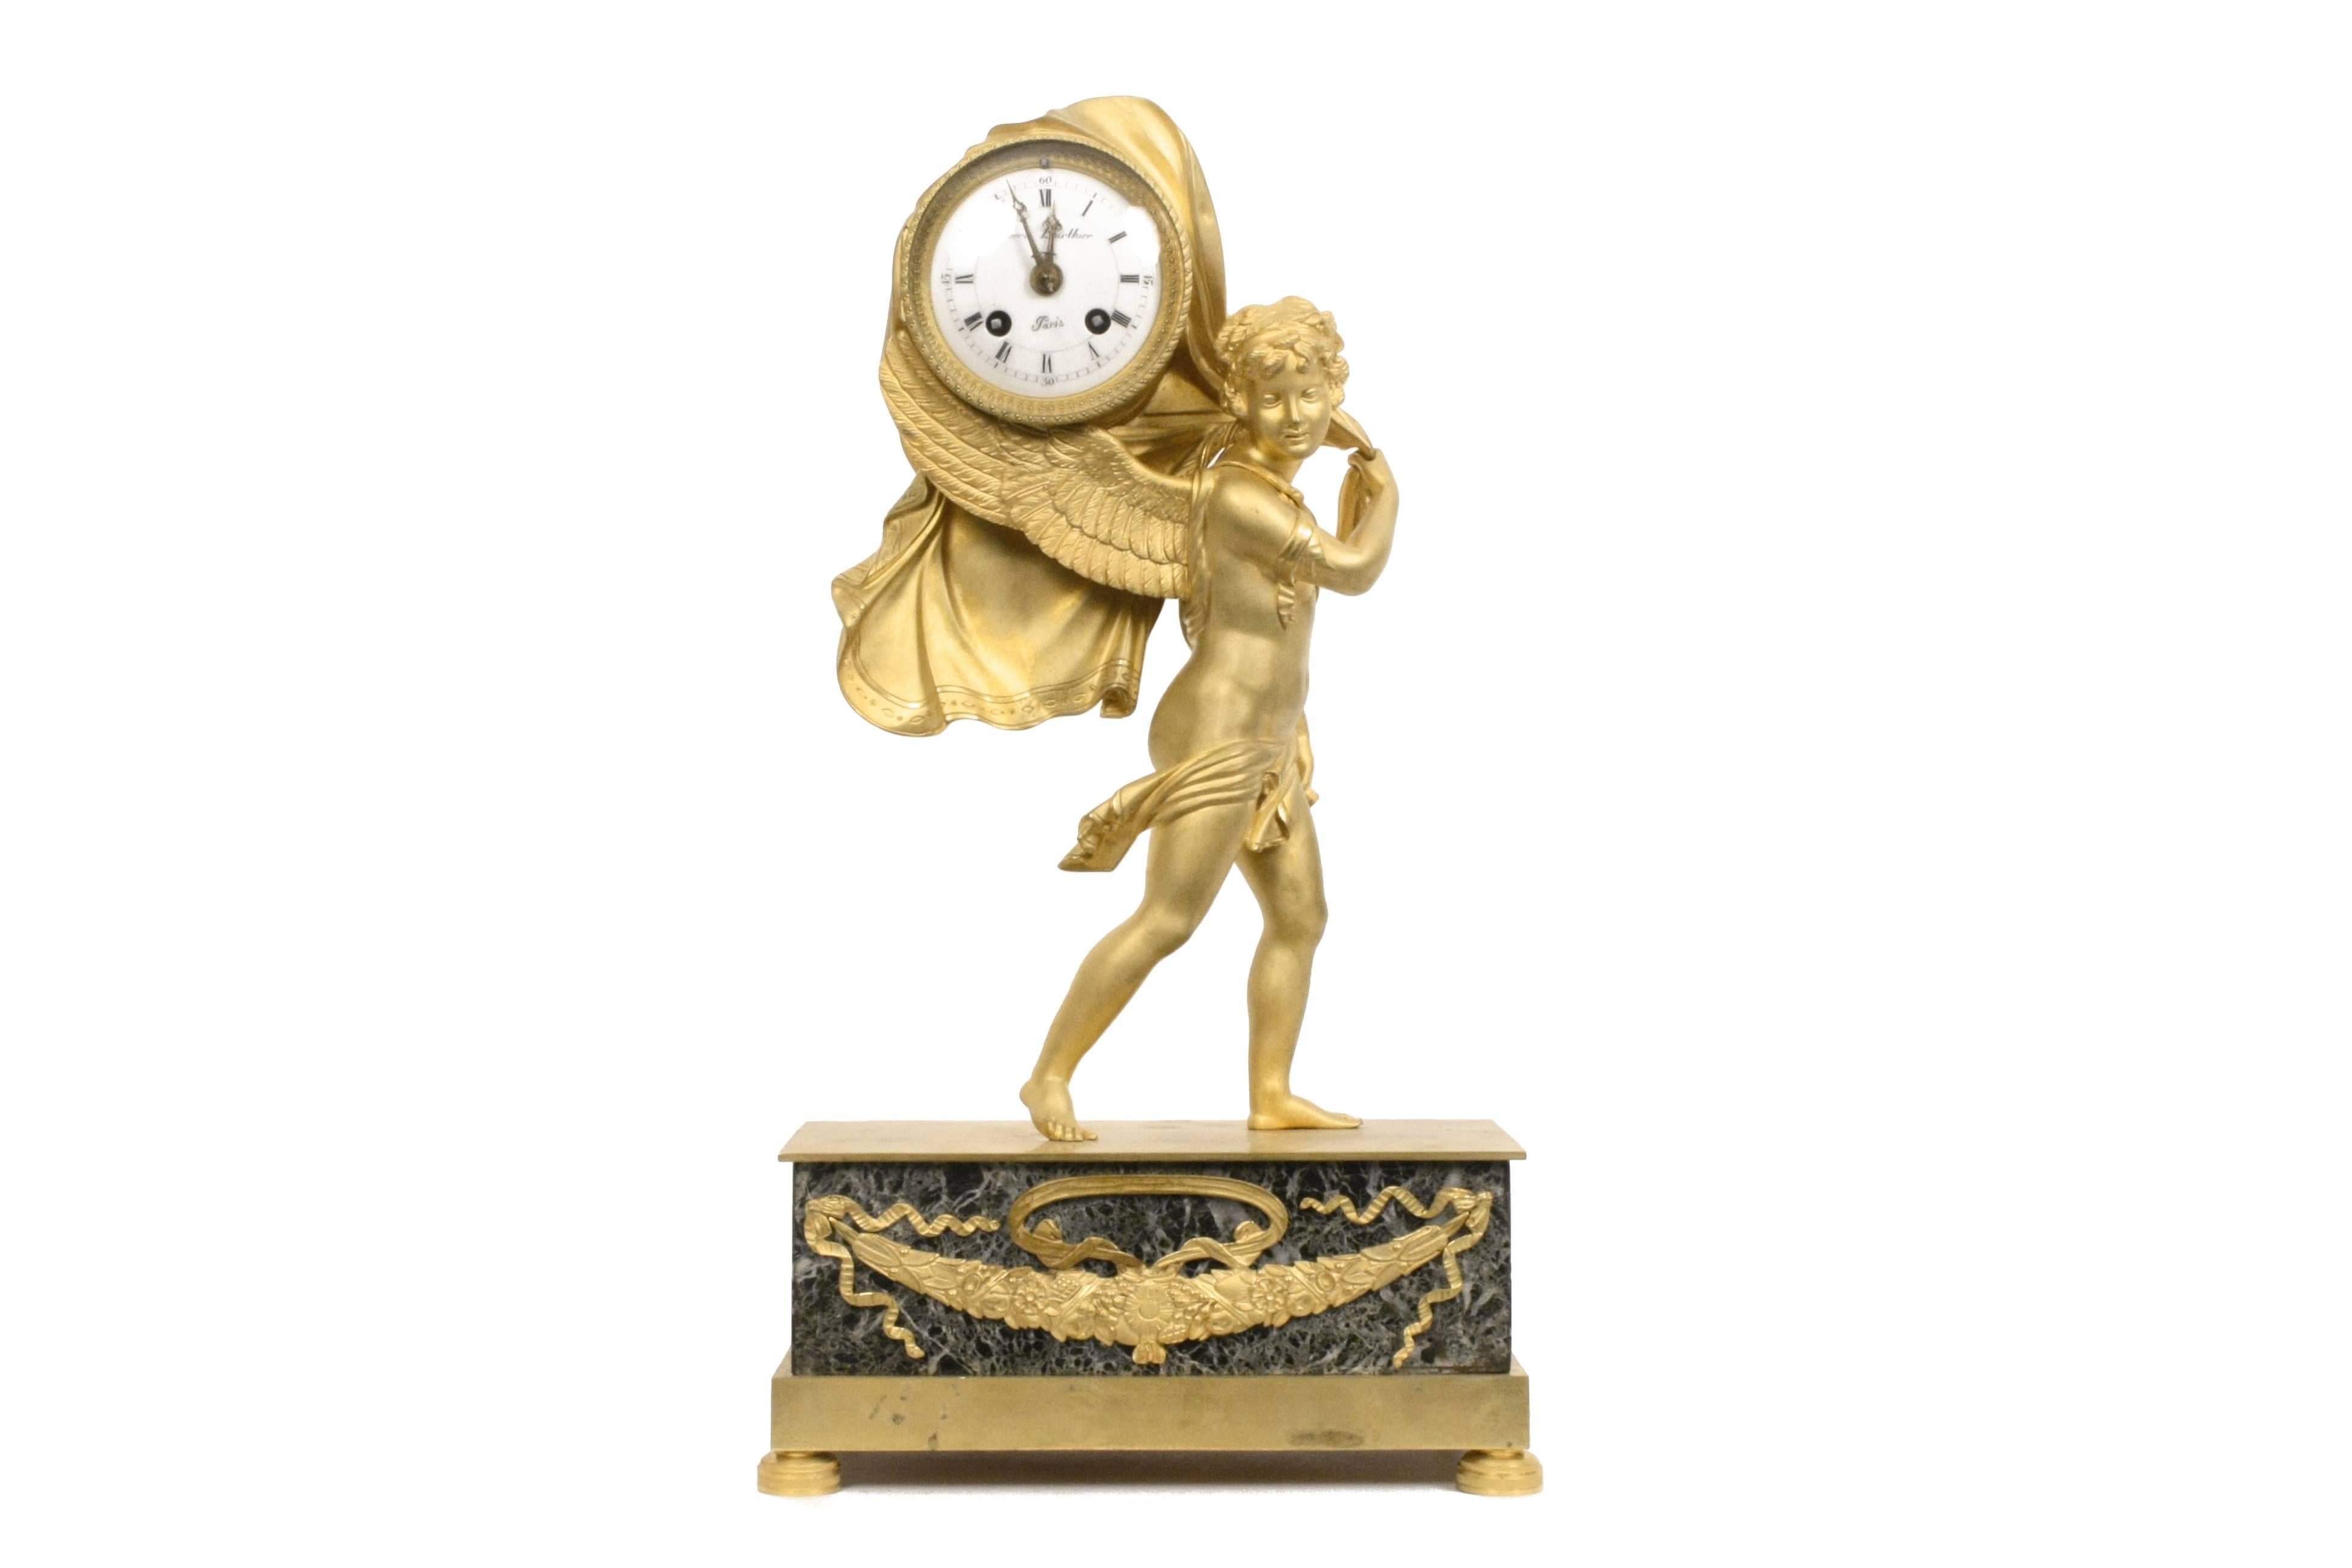 Winged cupid with flowing robe, clock resting between wings and fabric, raised on bronze ormolu-mounted verde antico plinth. 
France, first half of the 19th century.

Measures: H 16 in.